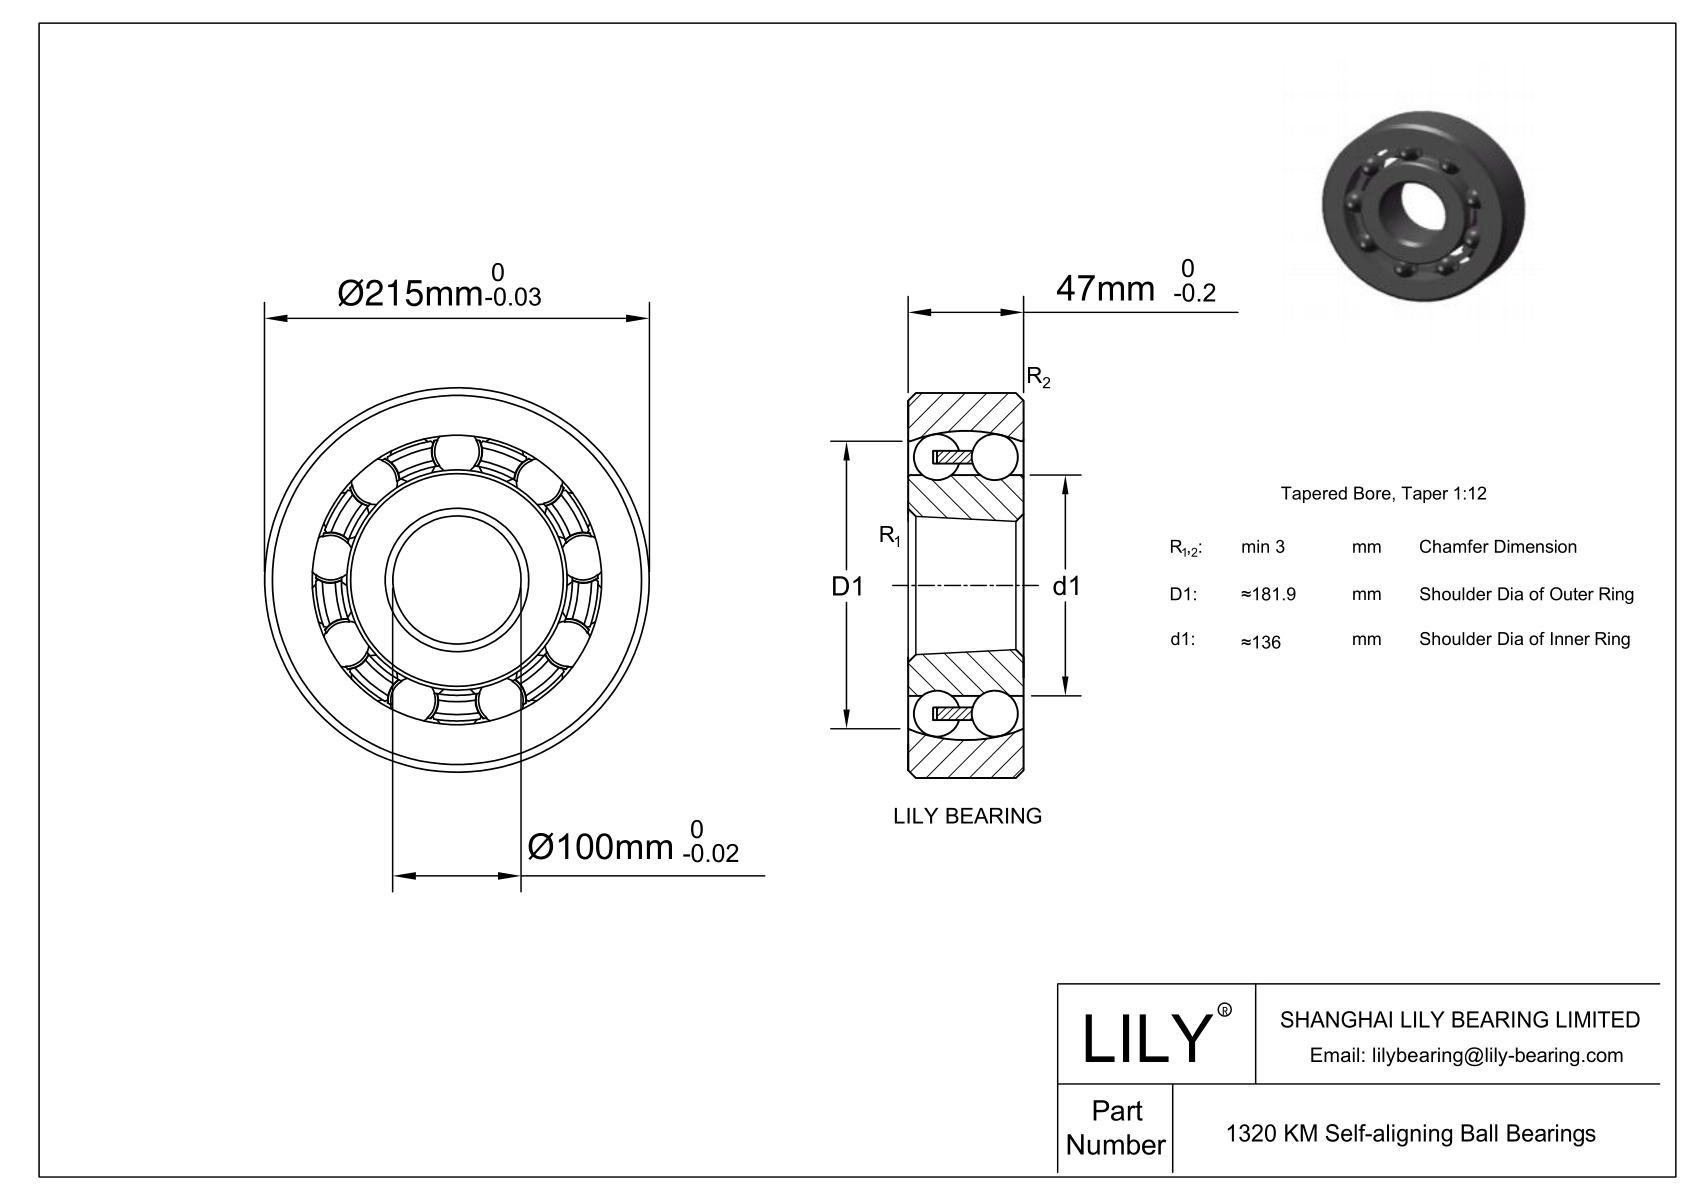 S1320 KM Stainless Steel Self Aligning Ball Bearings cad drawing